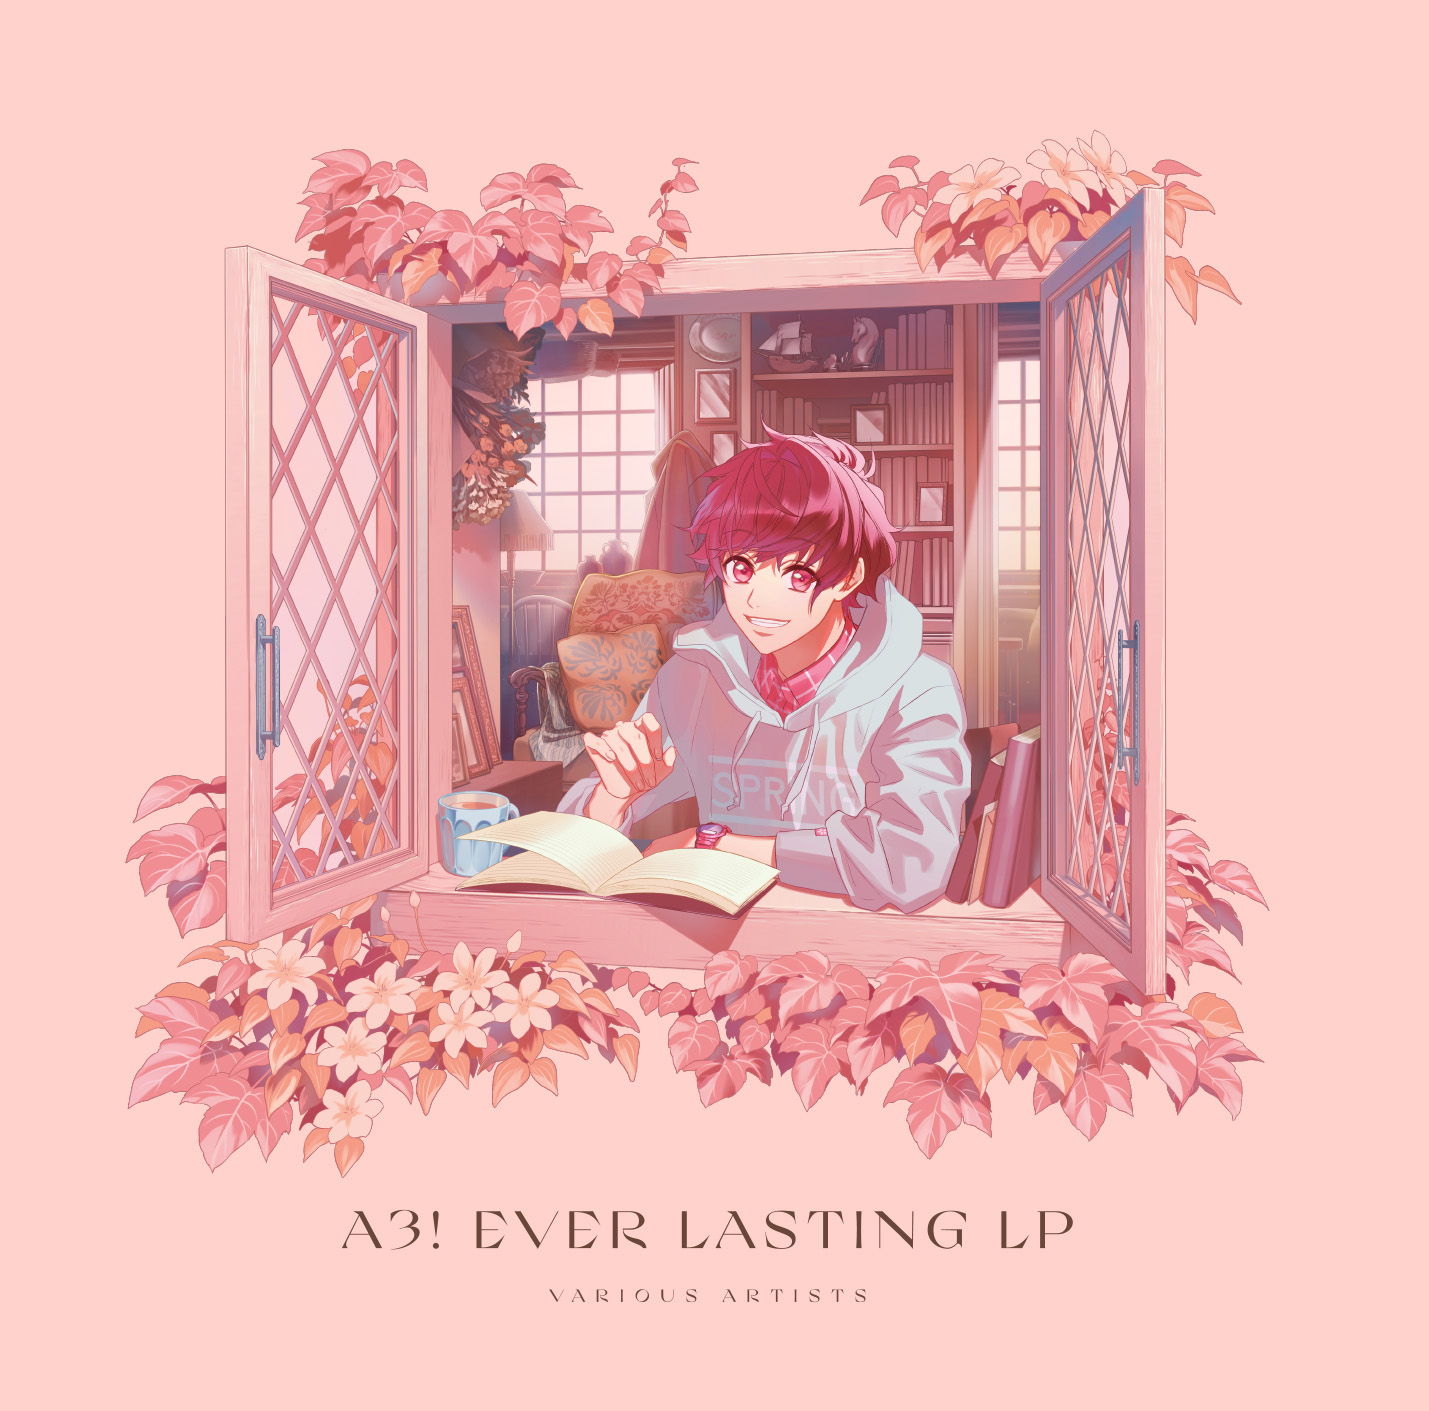 【A3!】A3! EVER LASTING LP(CD only)